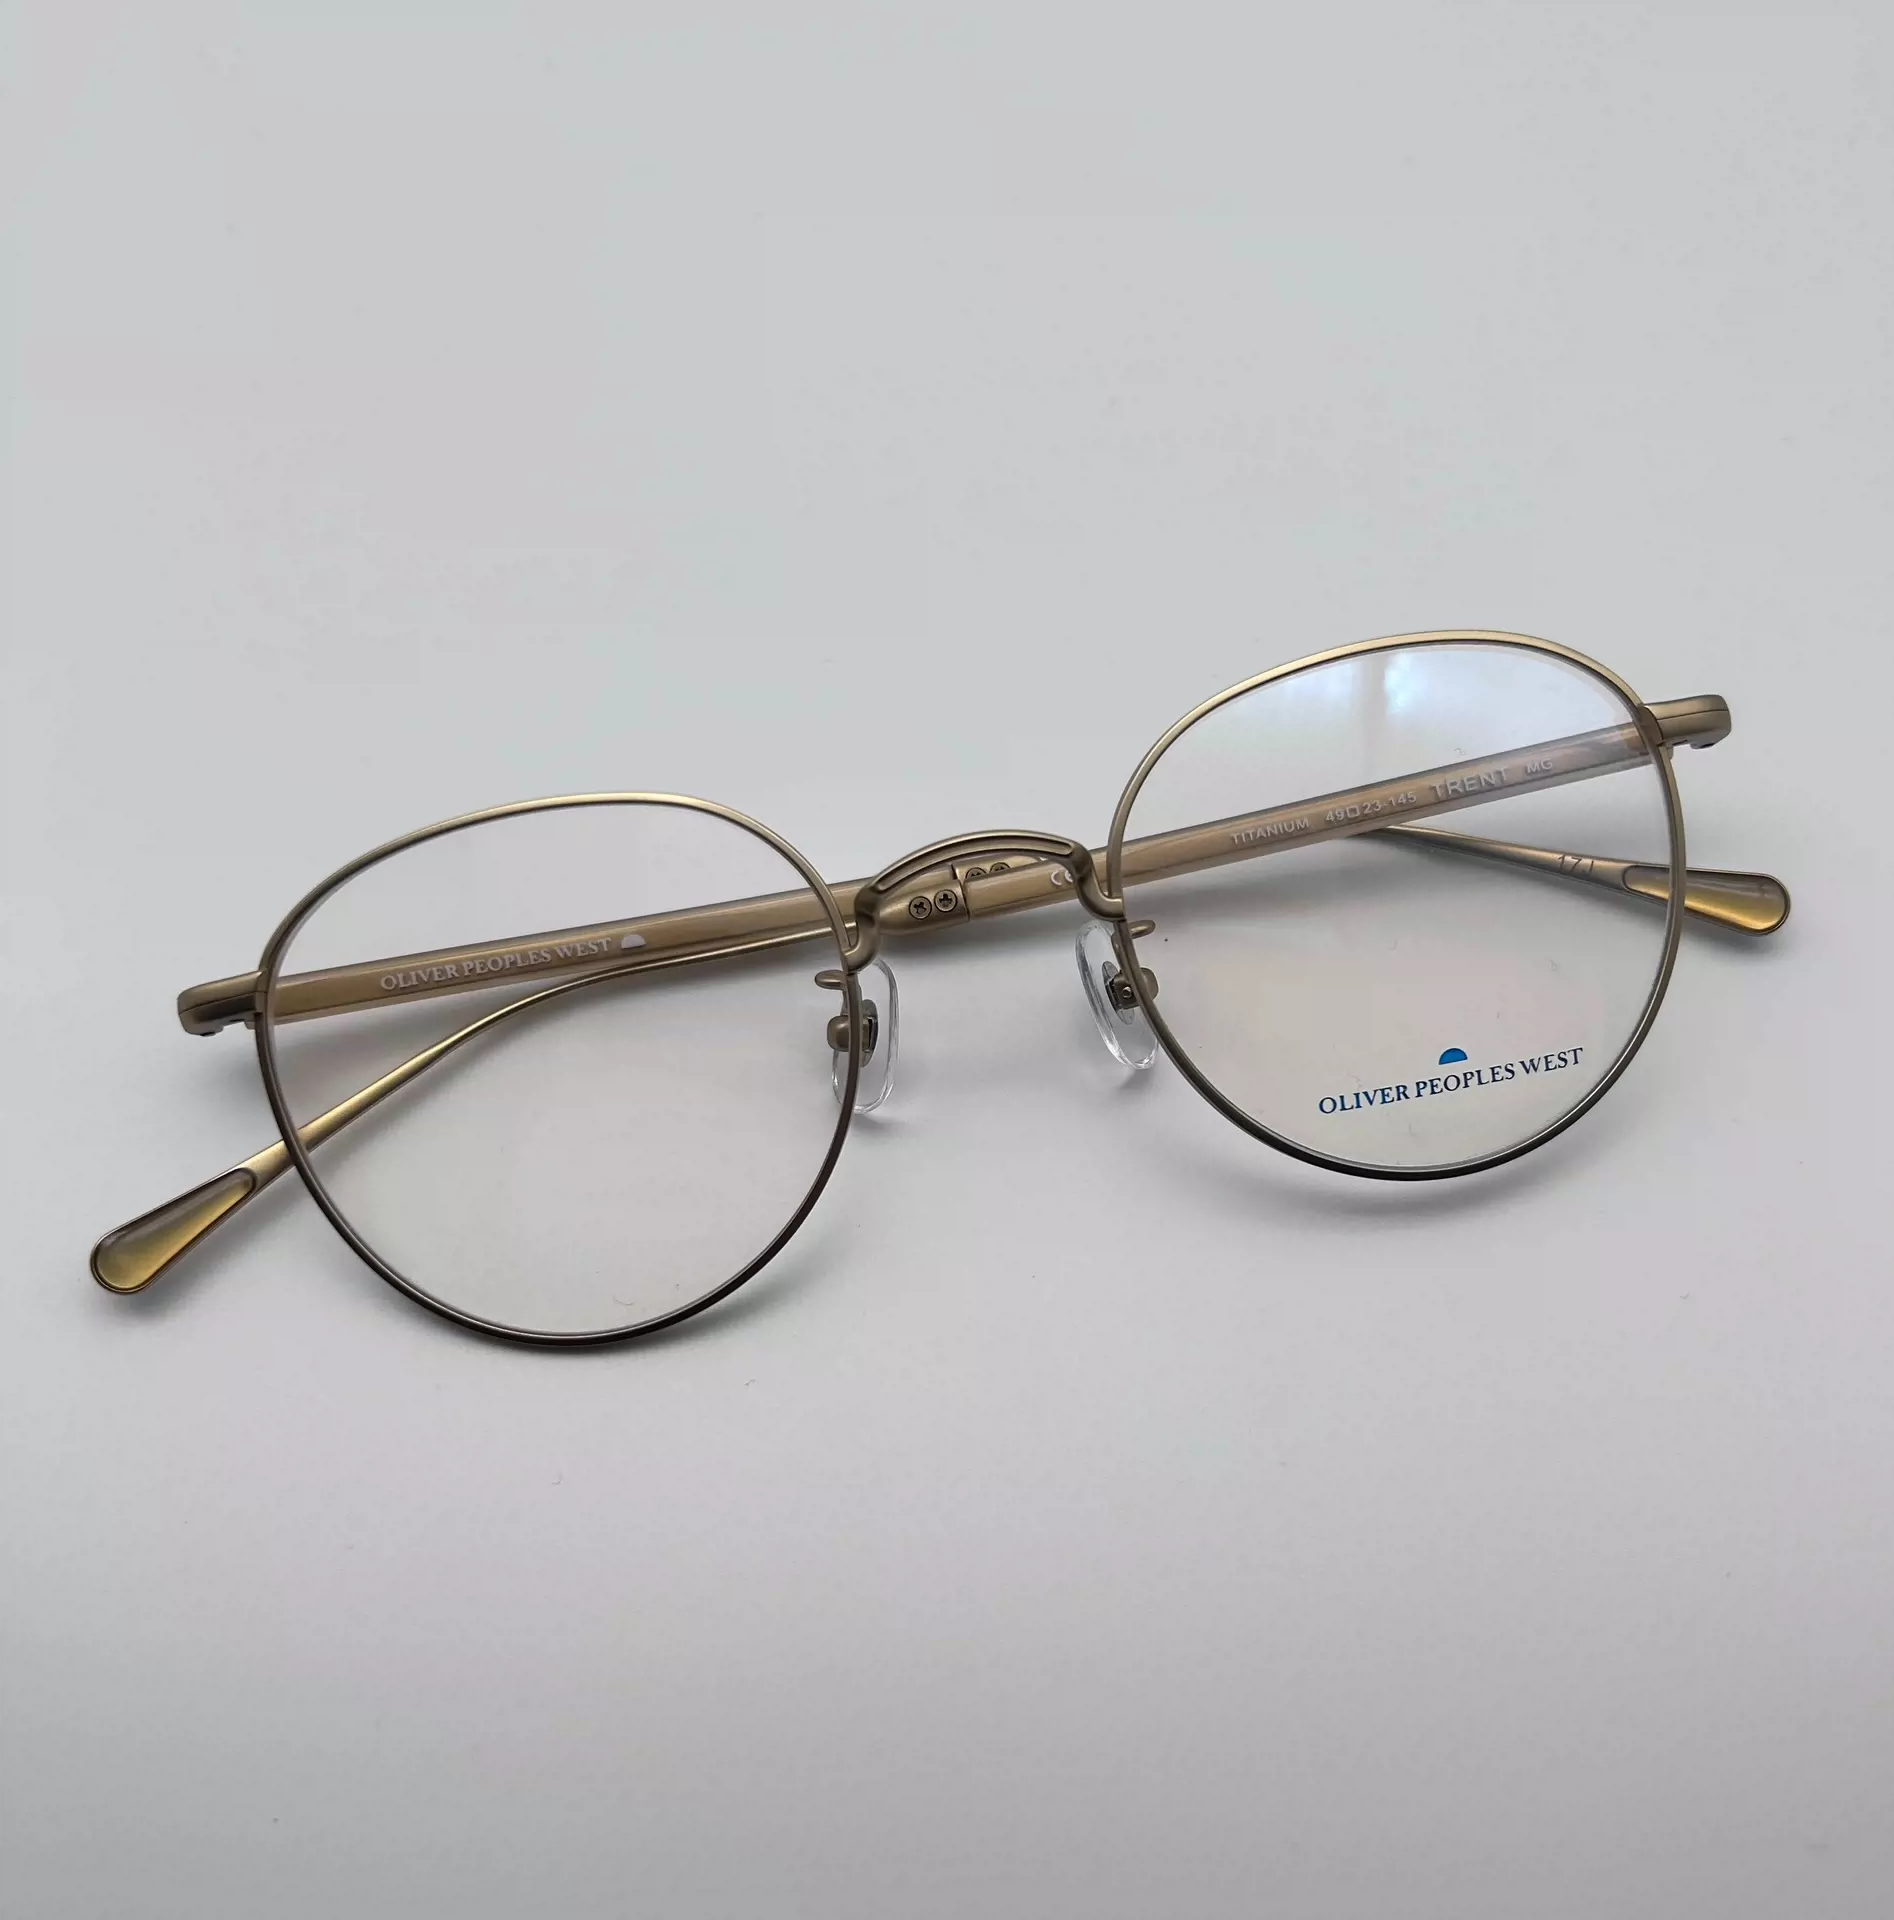 OLIVER PEOPLES WEST TRENT MG-